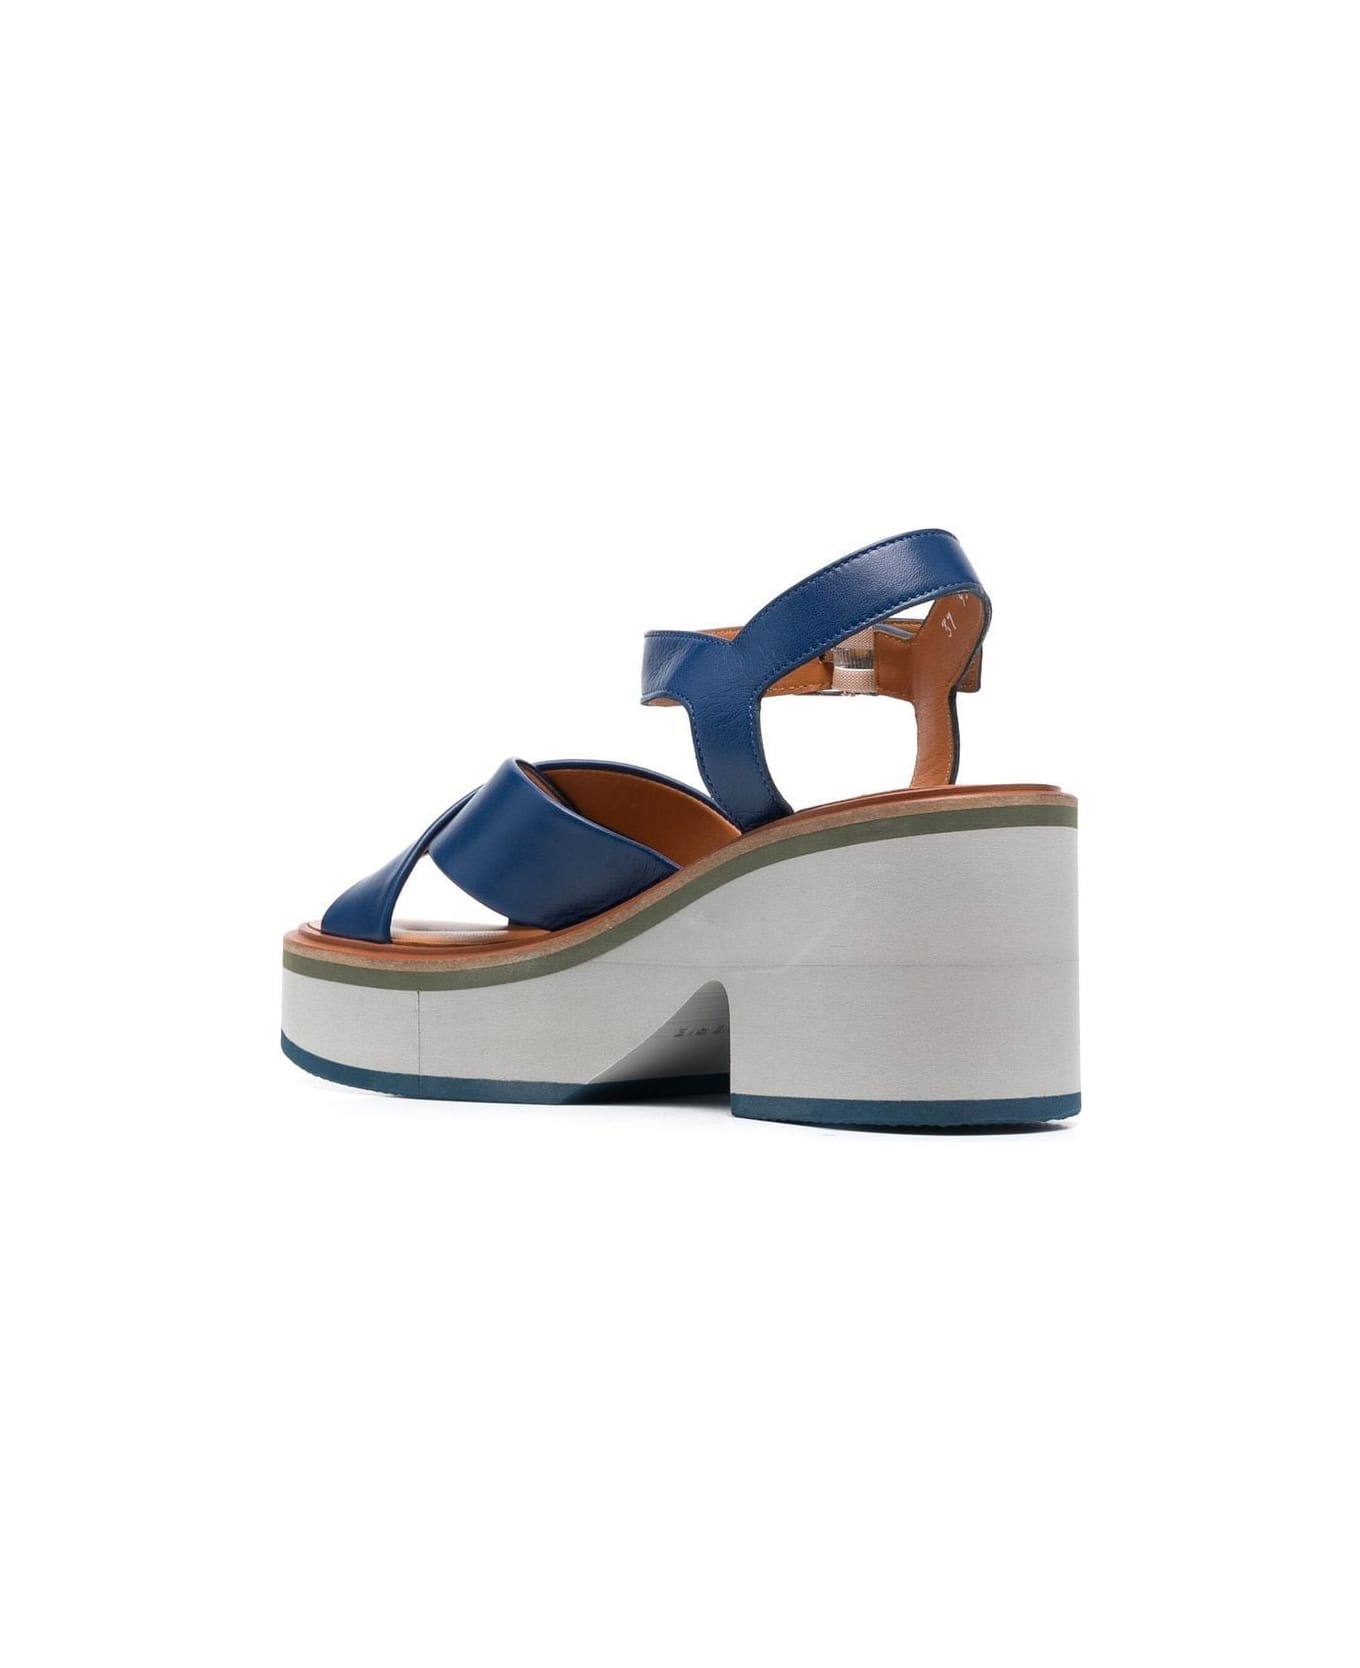 Clergerie Charline9 Criss Cross Sandal With Closure At The Ankles - Navy Nap